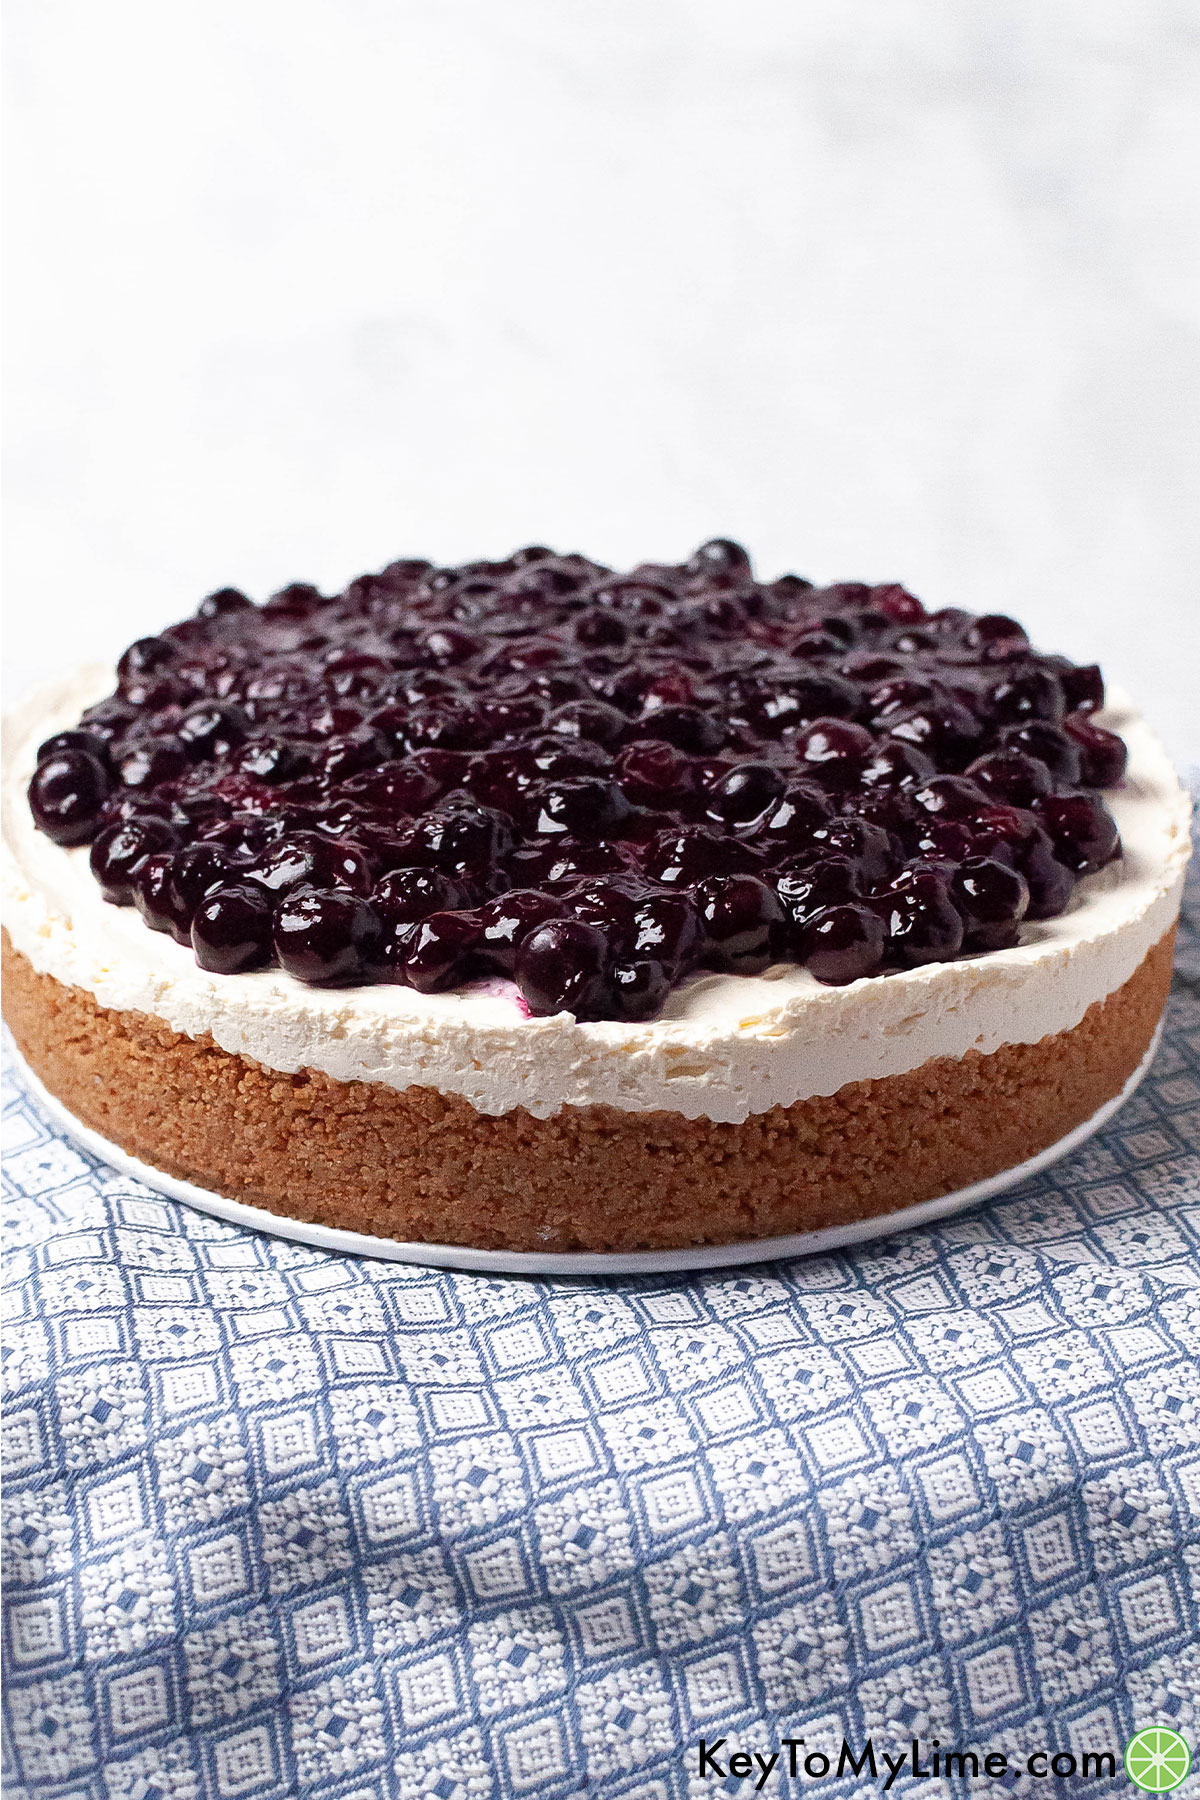 A completed blueberry cheesecake on a large platter on top of a blue napkin.